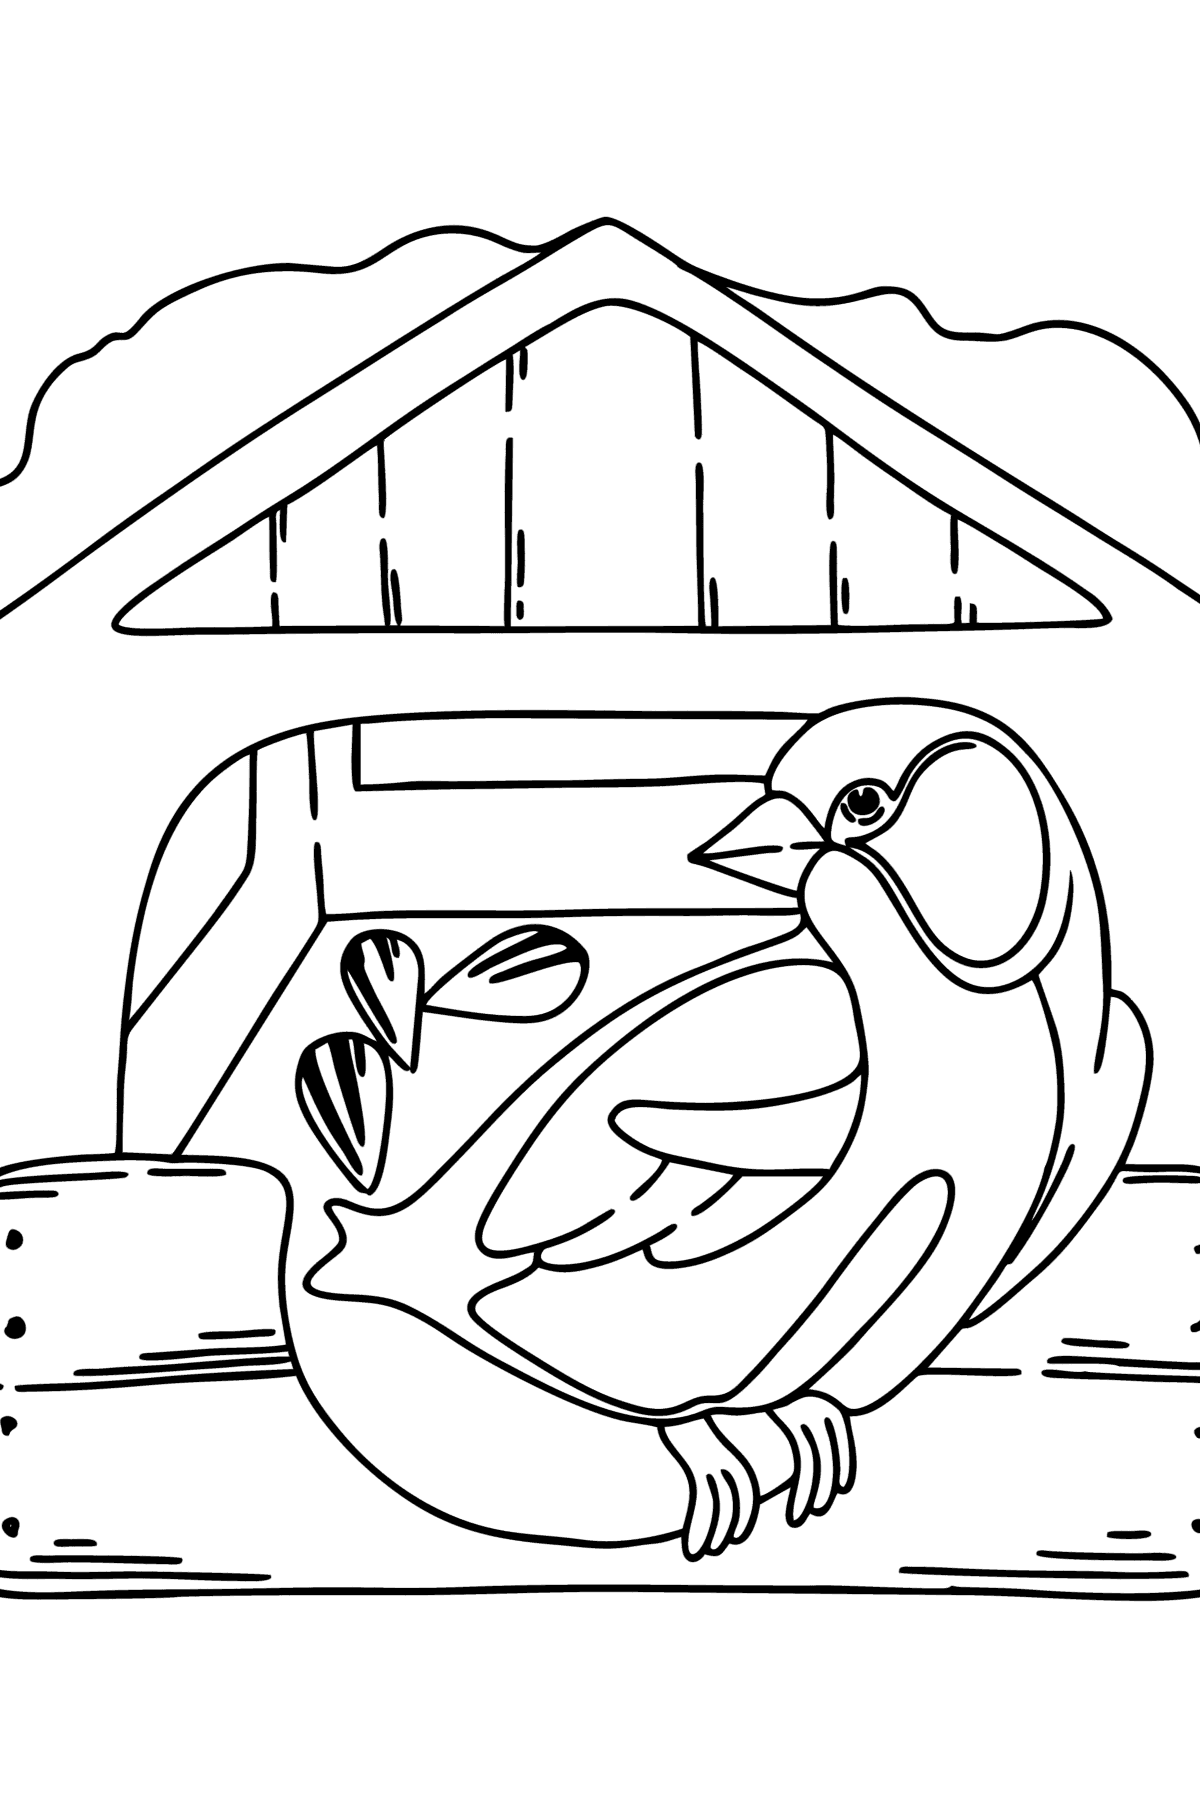 Coloring page - Bird feeder - Coloring Pages for Kids